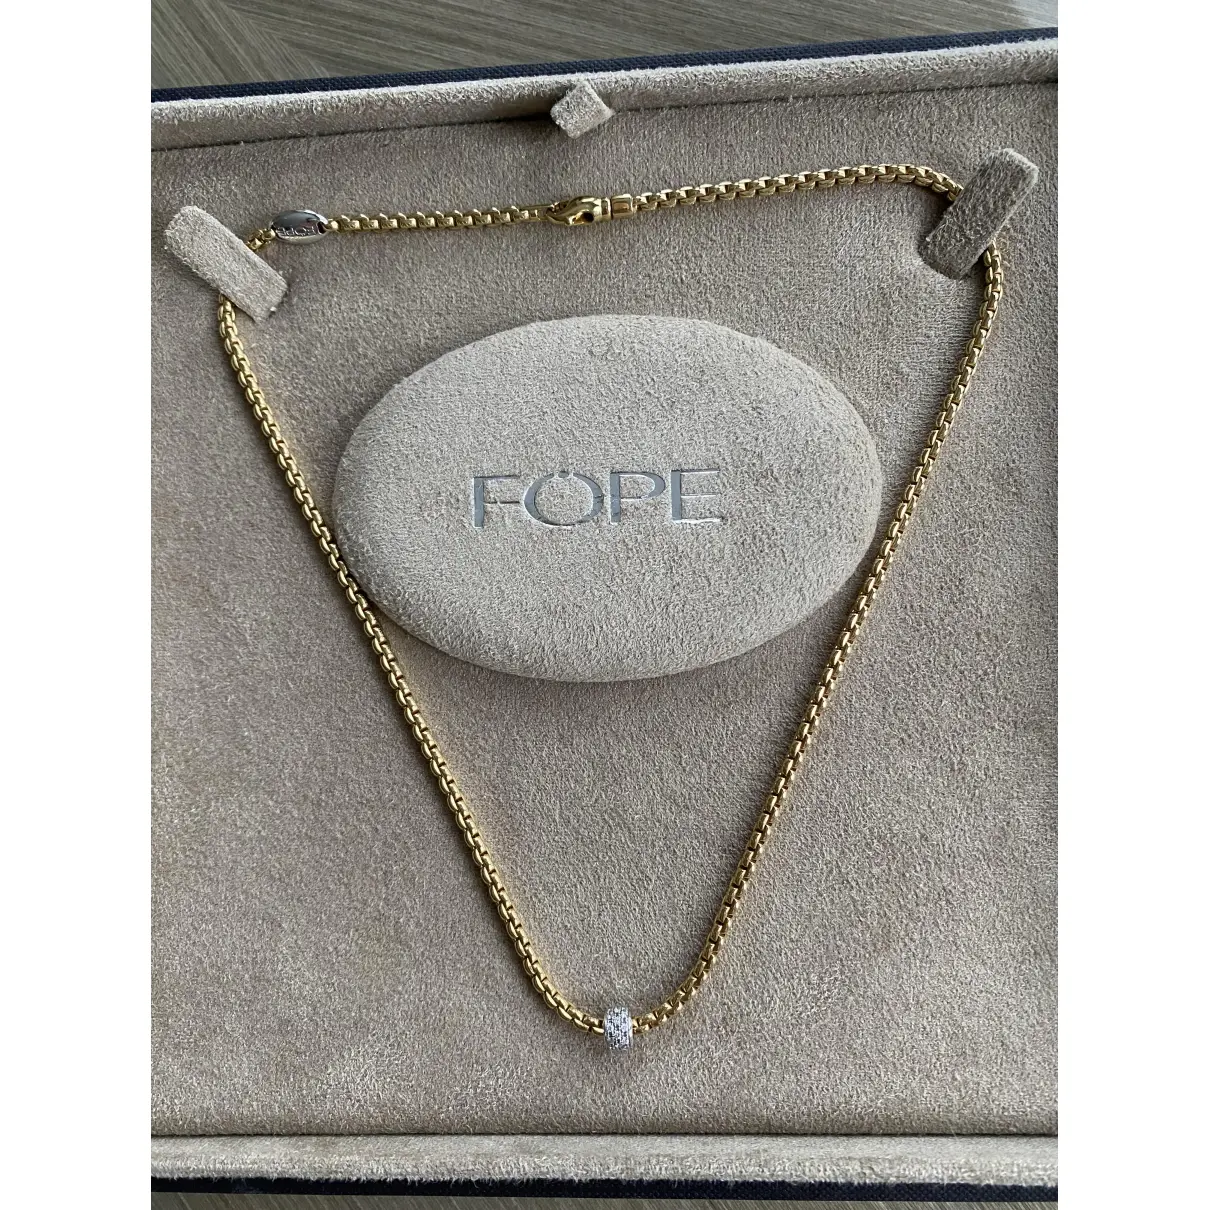 Buy Fope Yellow gold necklace online